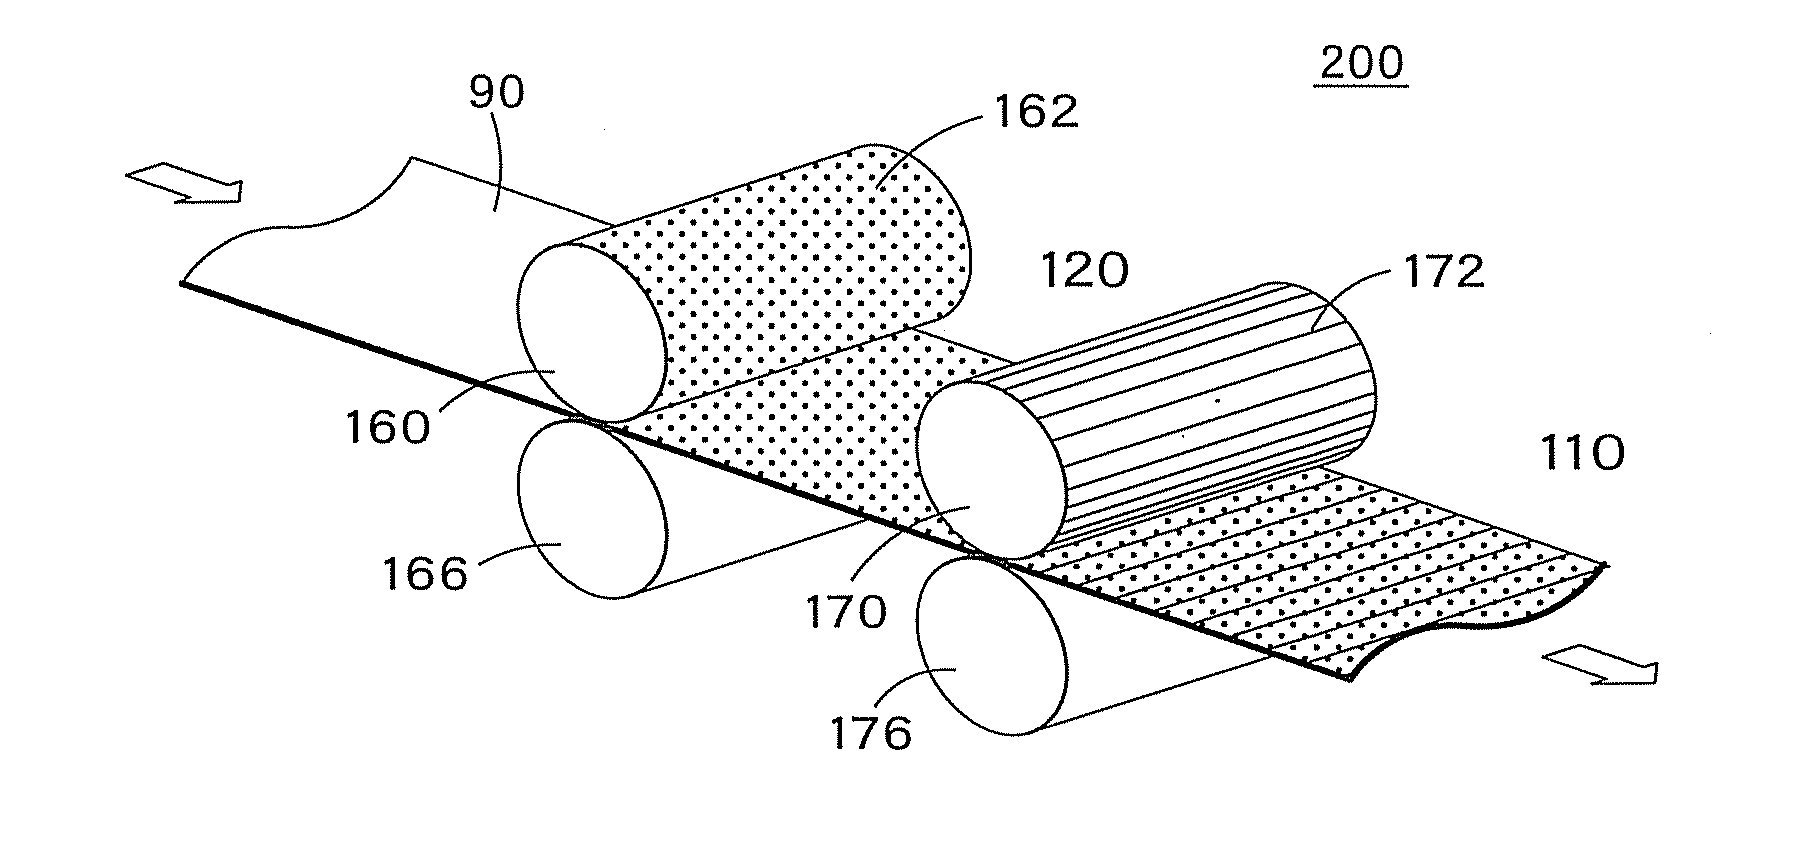 Embossed release paper and process for producing the same